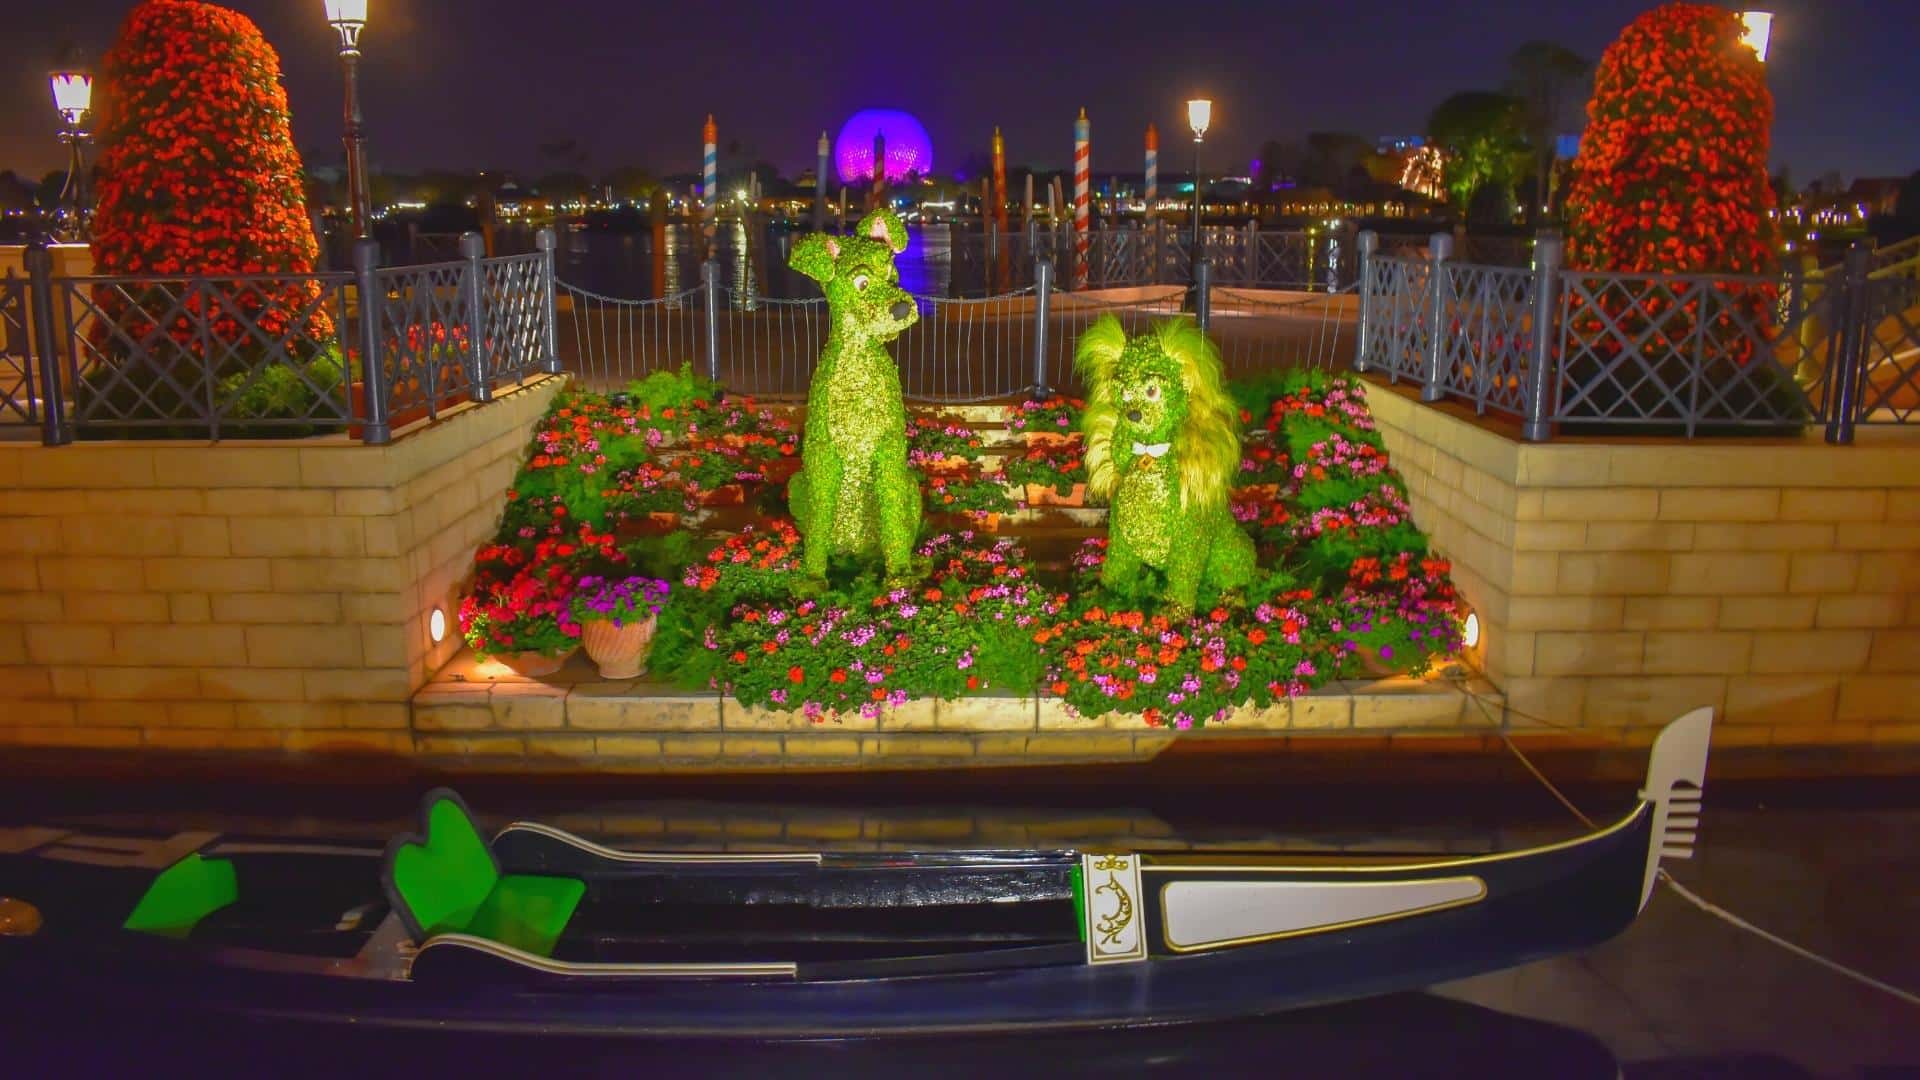 Epcot at Night - Lady and the Tramp